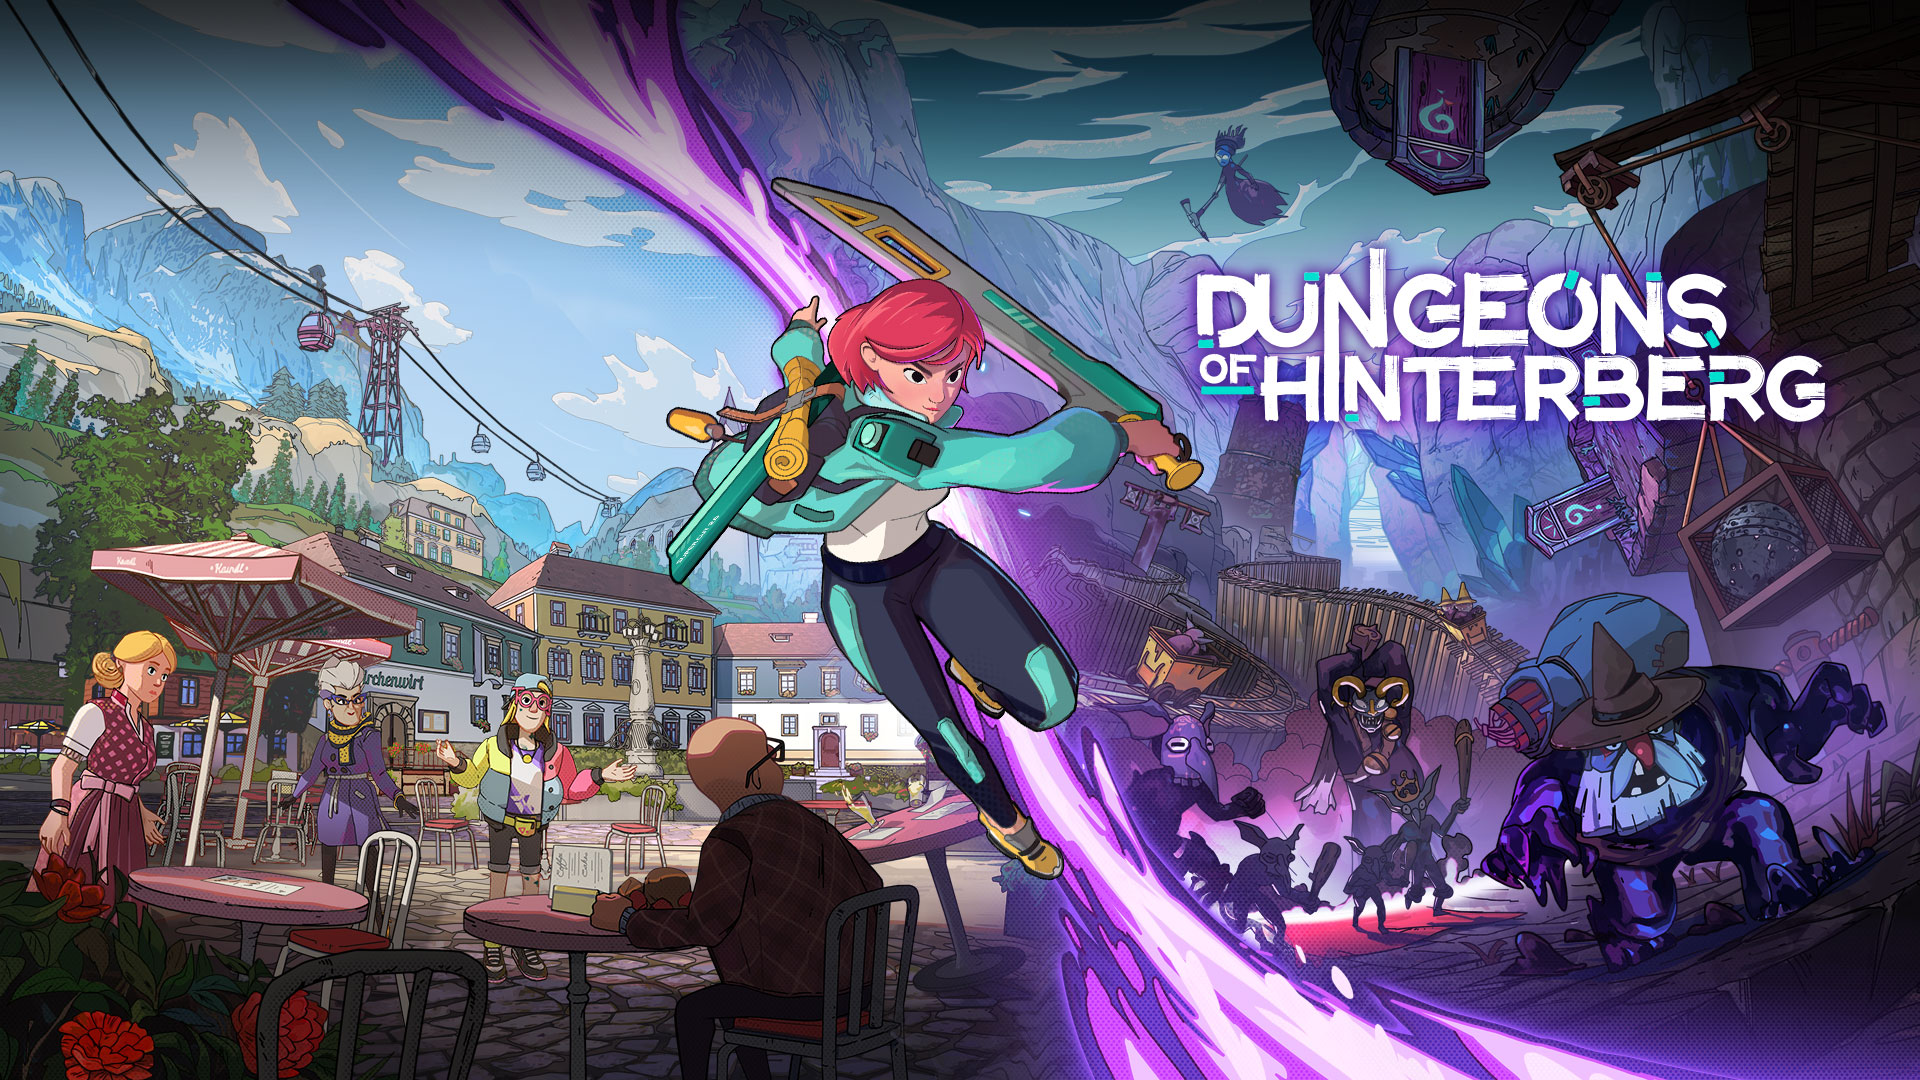 Dungeons of Hinterberg logo, A girl swings her sword in the middle of a rift between a peaceful town and a dark village.